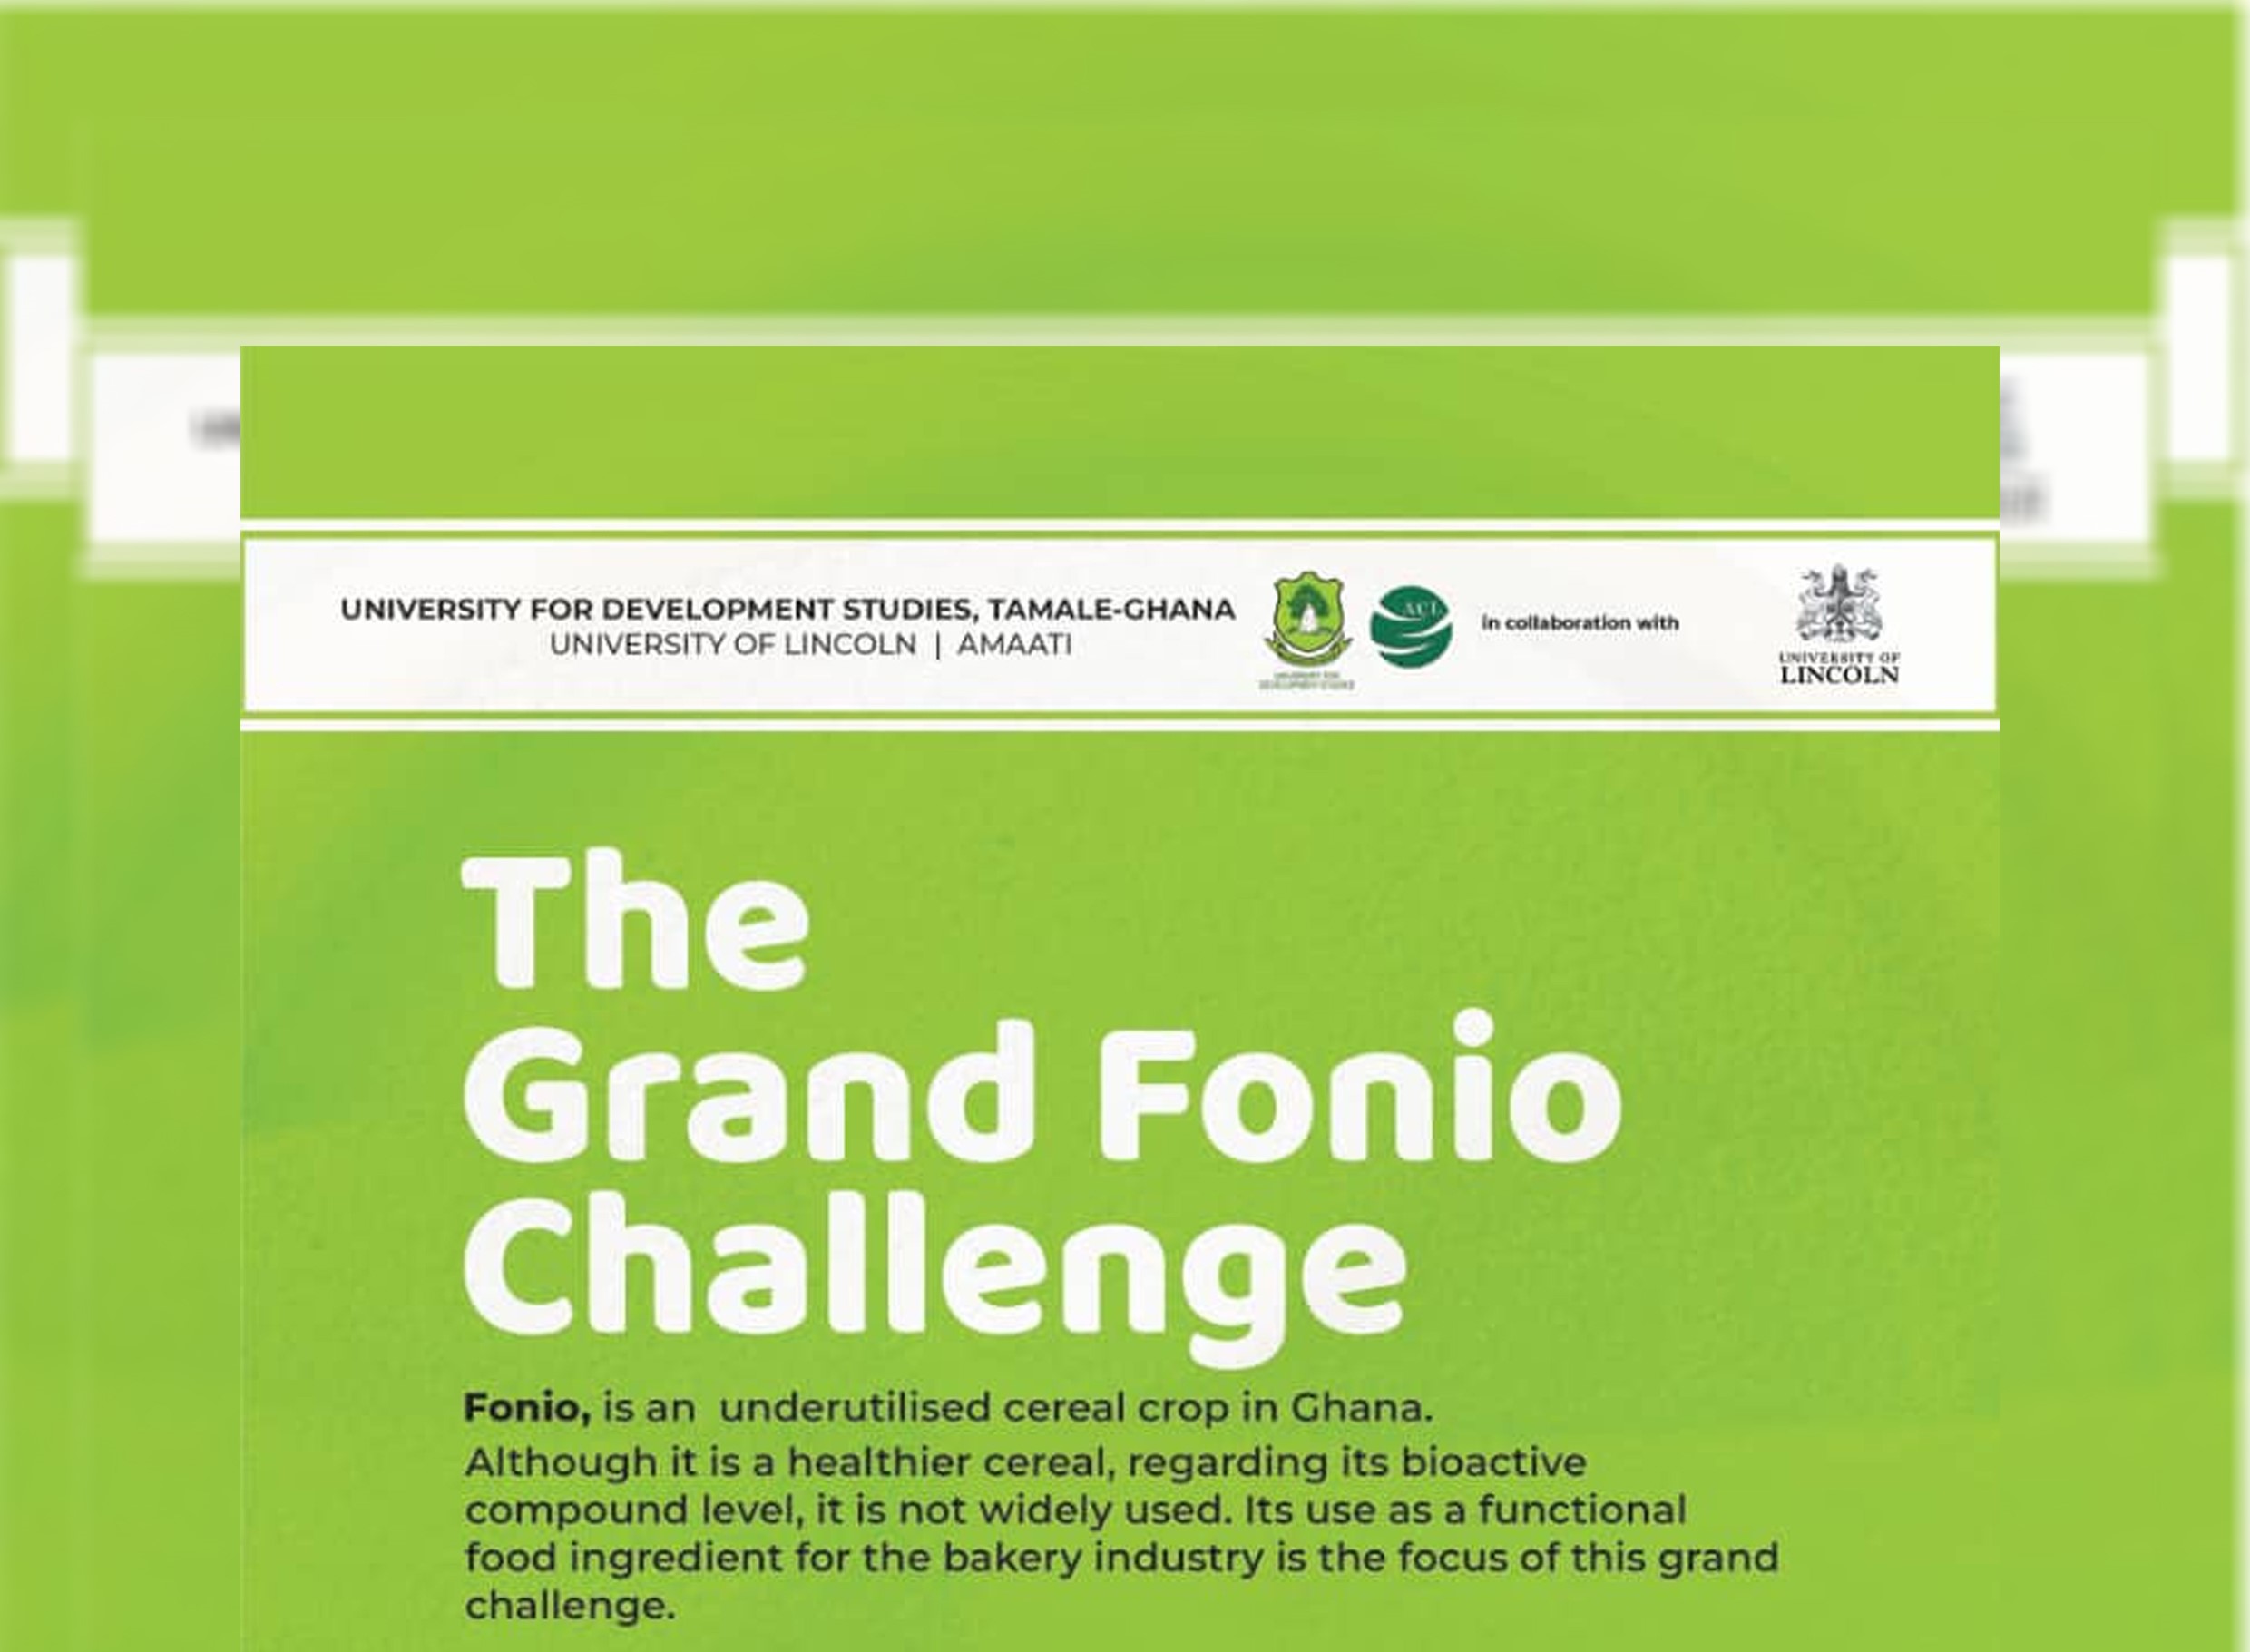 The University for Development Studies and The University of Lincoln Present The Grand Fonio Challenge